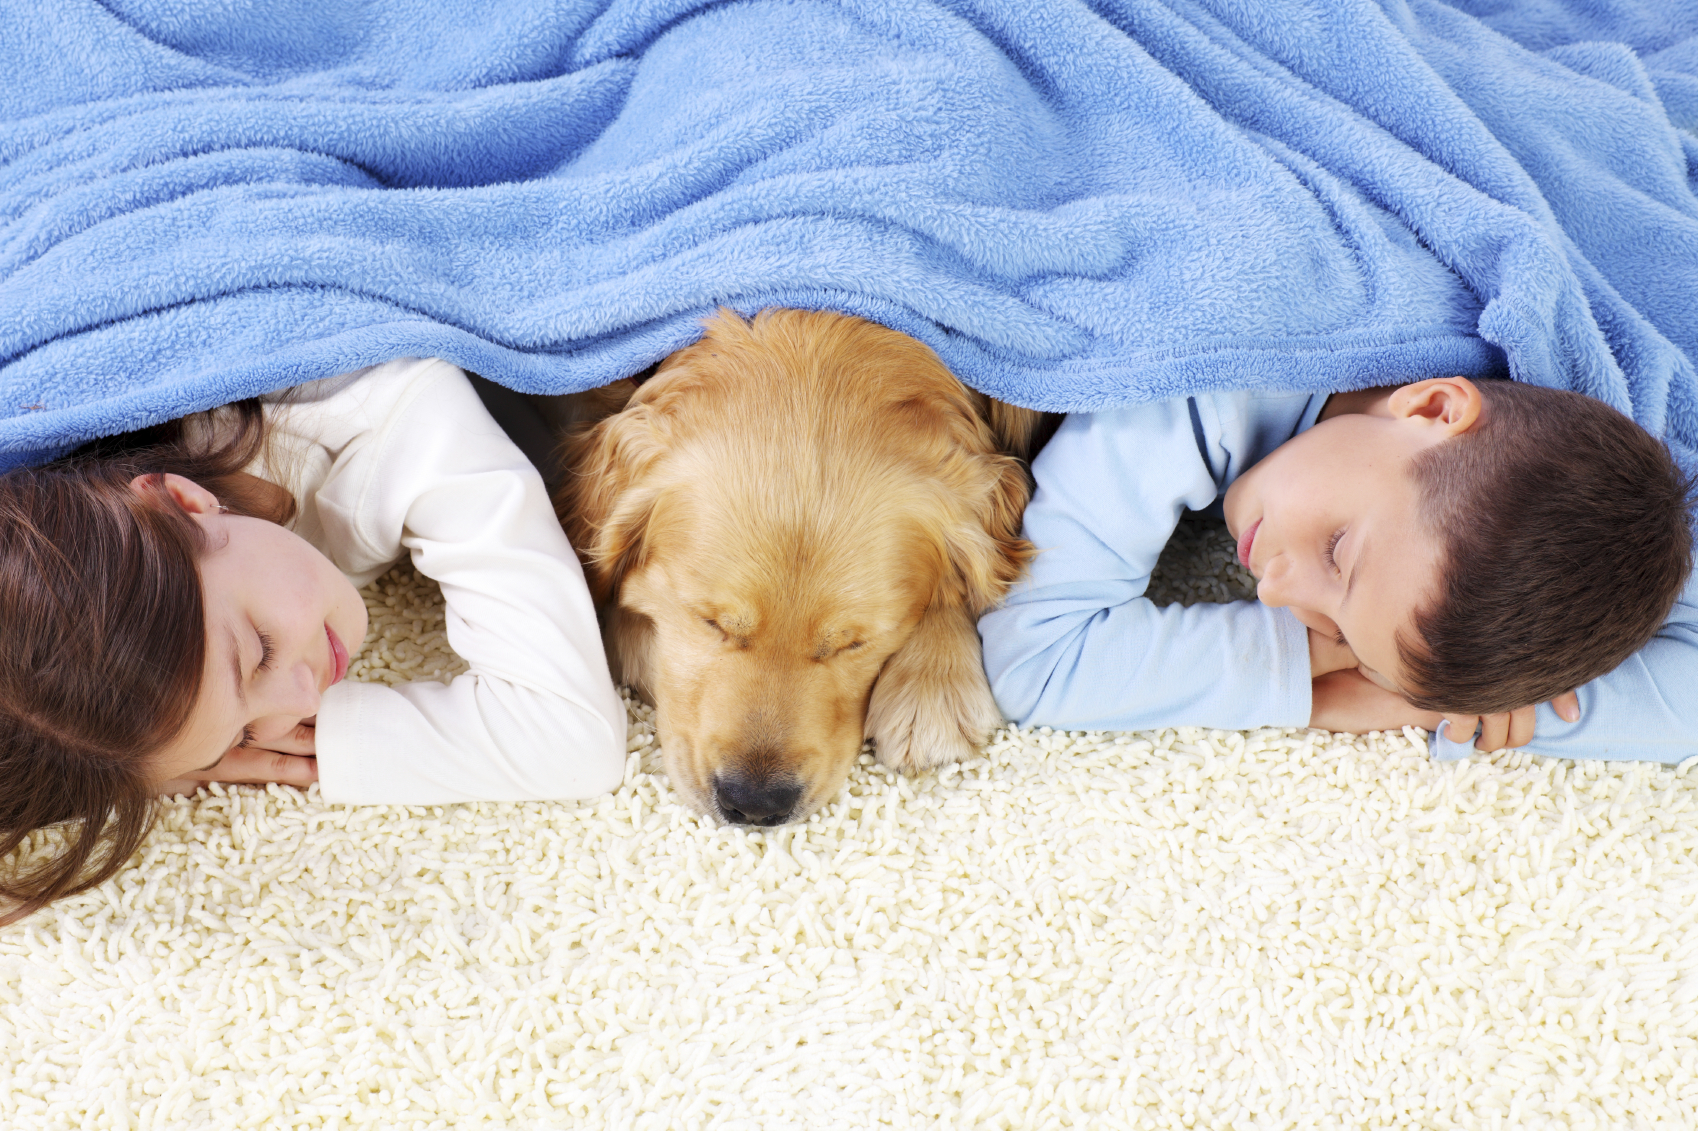 Boy, girl and dog sleeping covered with a blanket.